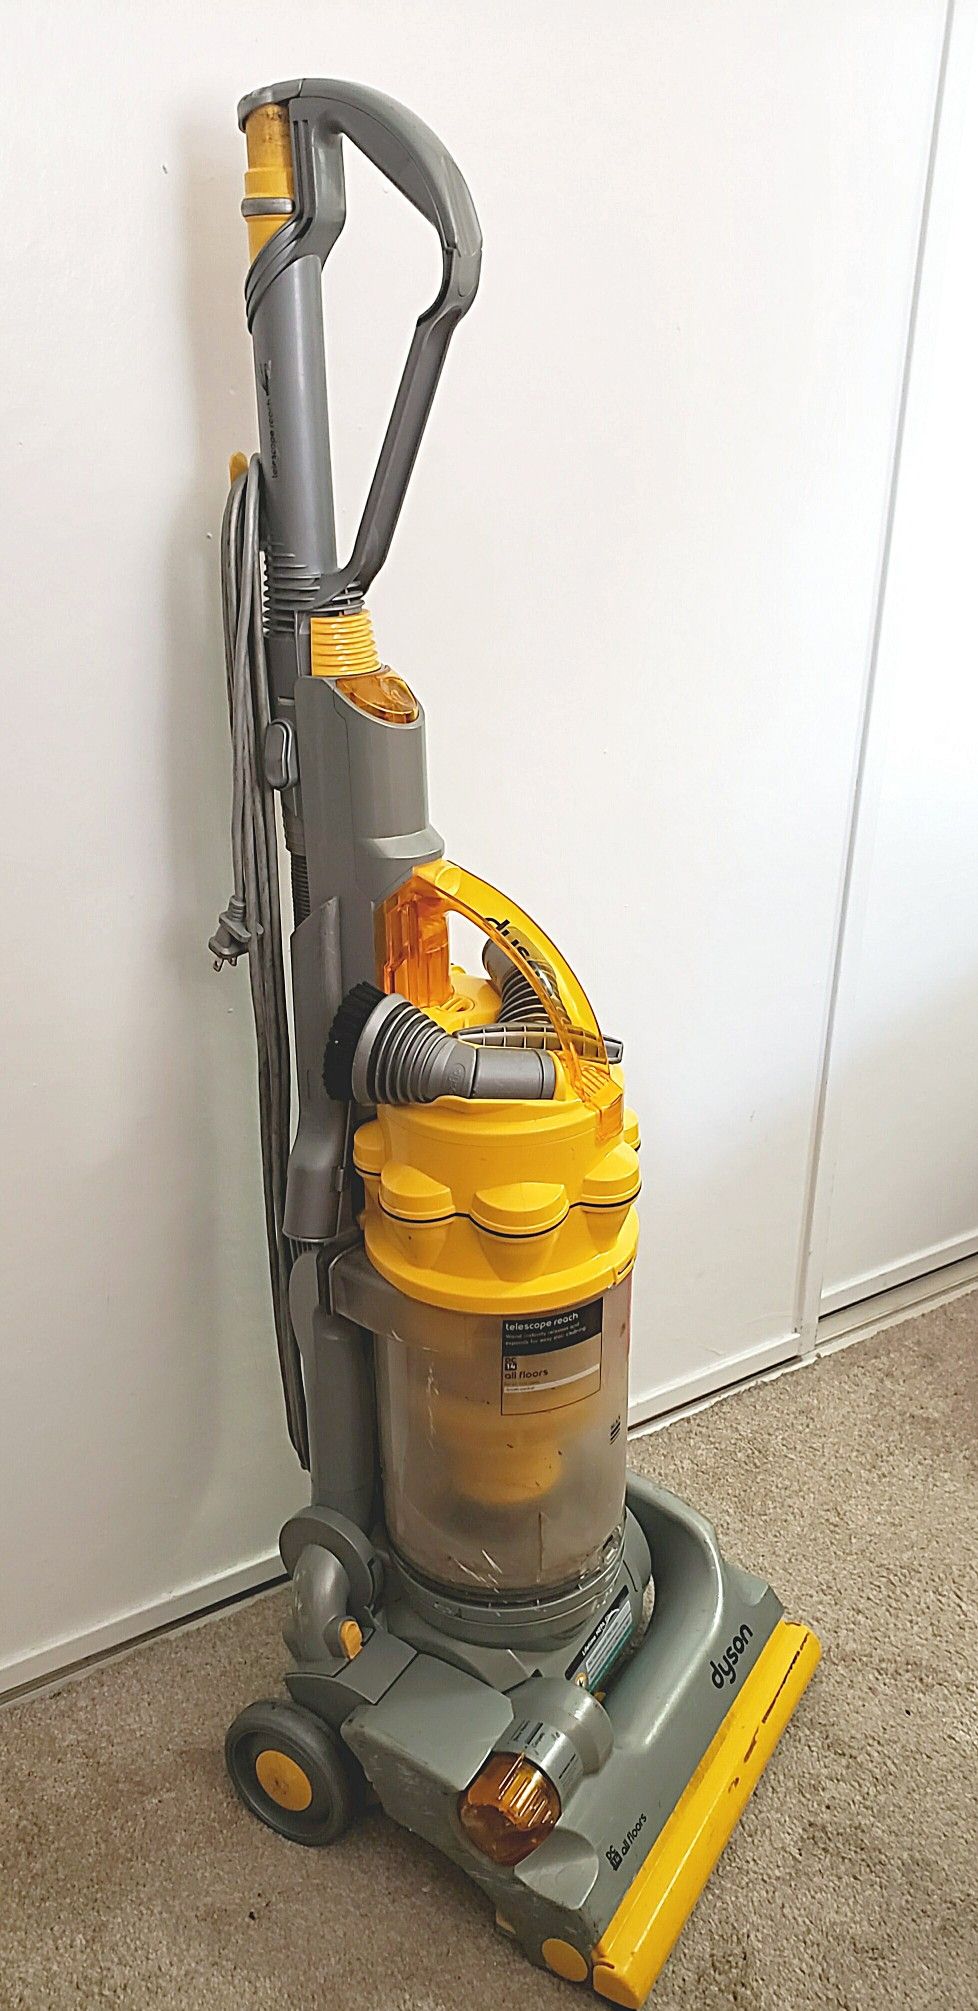 WORKING DYSON VACUUM w/ATTACHMENTS